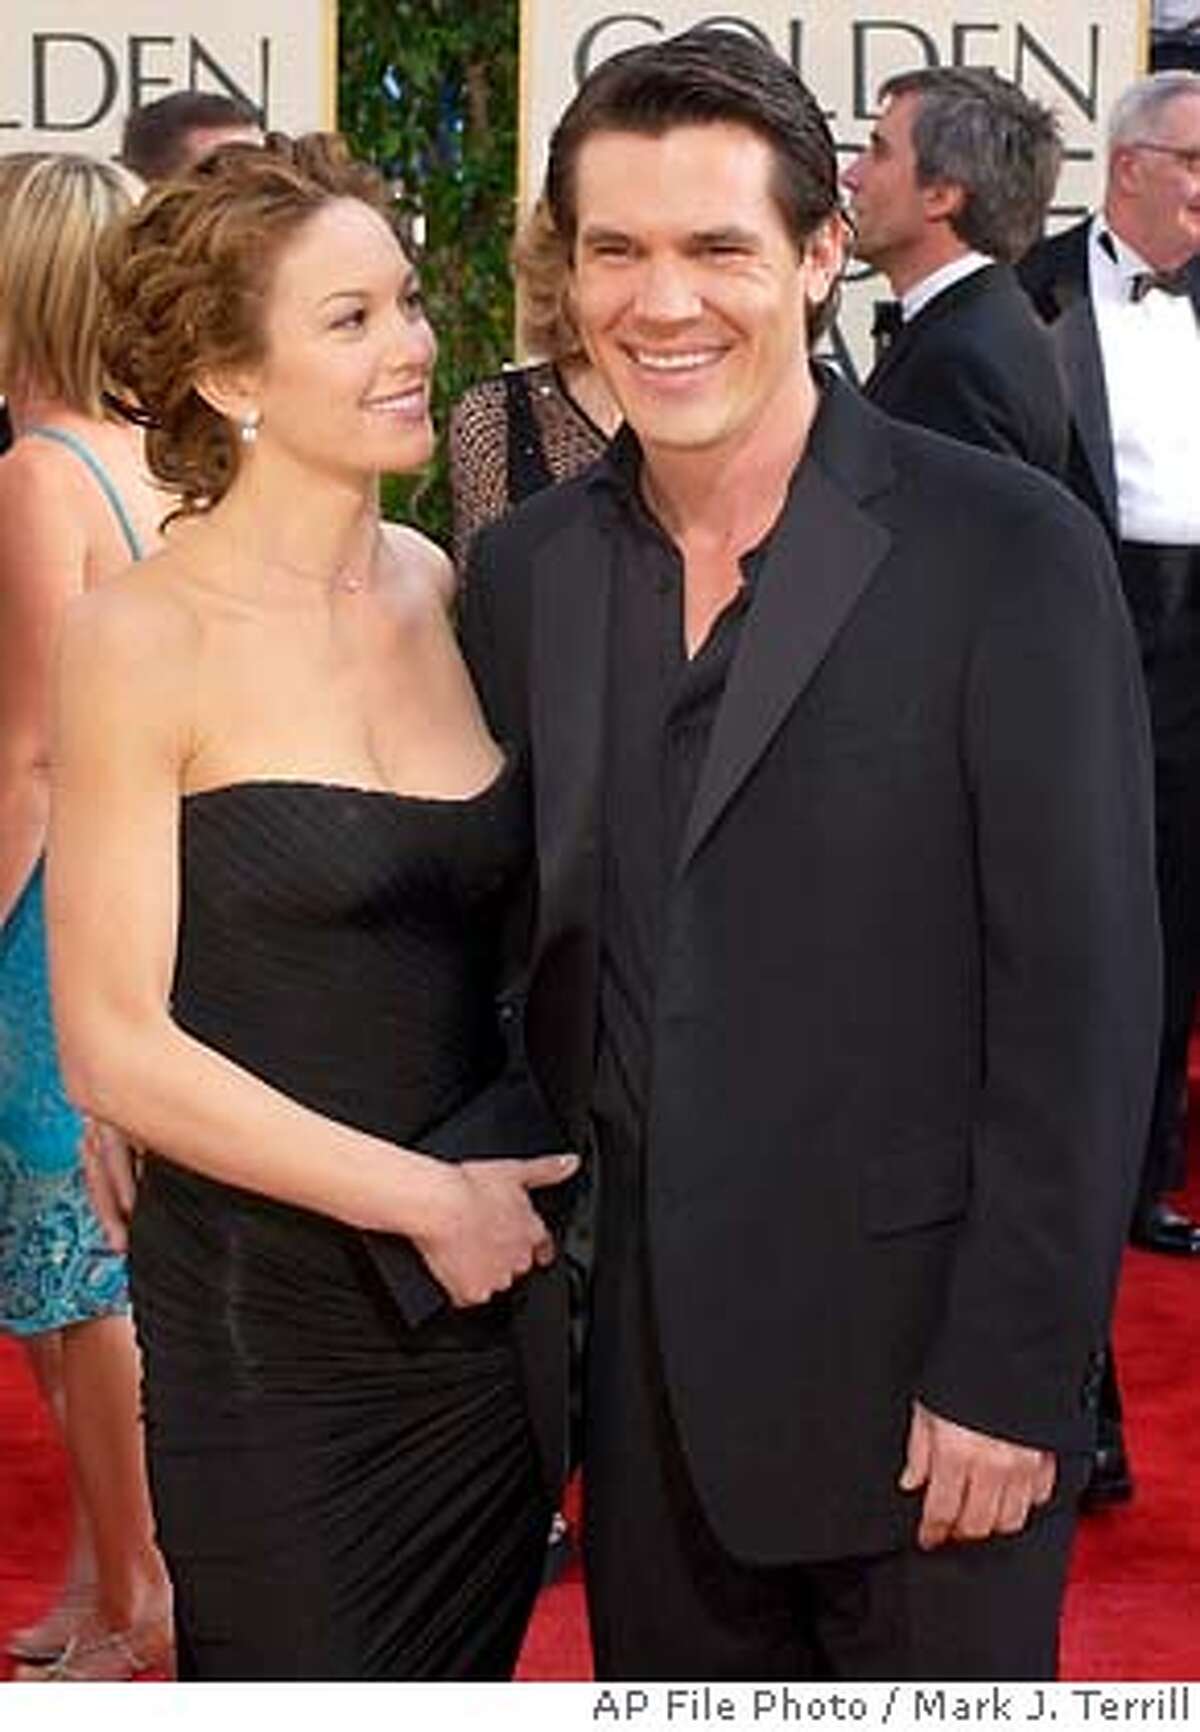 **FILE**Diane Lane arrives with then-boyfriend Josh Brolin at the Golden Globe Awards, in Beverly Hills, Calif., on Jan. 19, 2003. Brolin was cited for misdemeanor domestic battery over the weekend after Lane, now his wife, called police during an argument at the couple's home. Brolin was arrested around 3 a.m. Sunday, Dec.19, 2004, and released on $20,000 bail, Frank Mateljan, a spokesman for the city attorney's office, said Monday.(AP Photo/Mark J. Terrill)